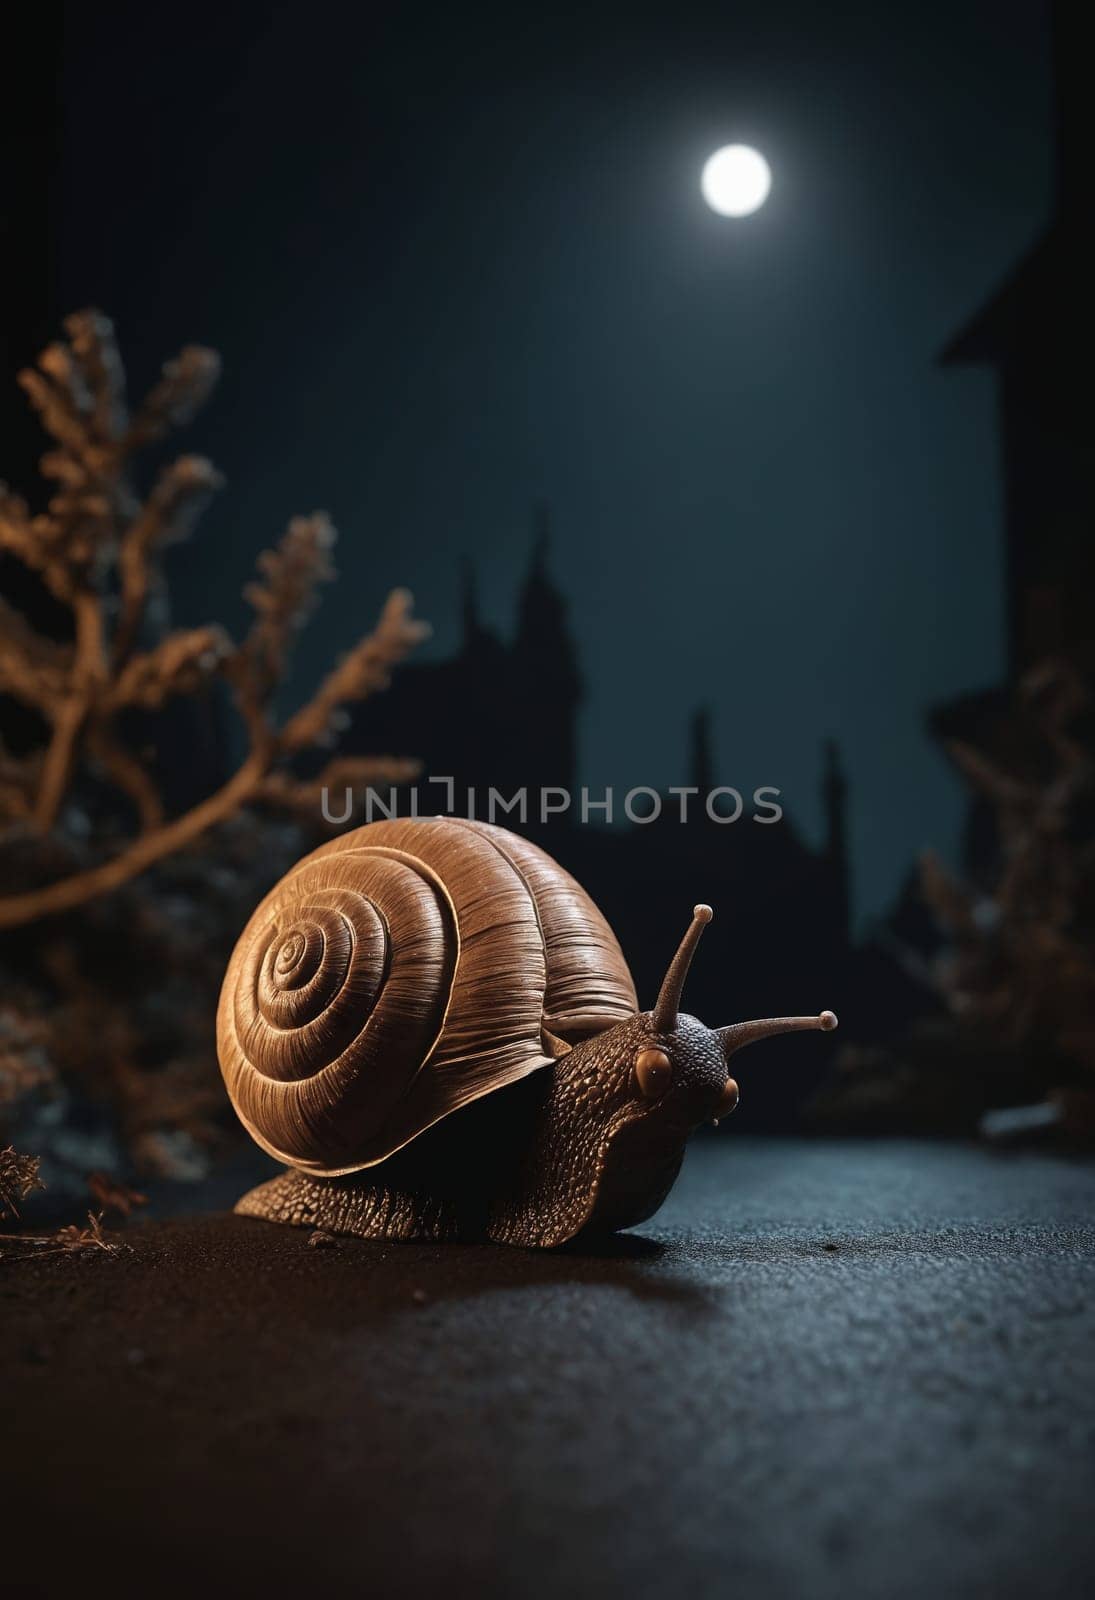 A terrestrial animal, the snail, with its spiral shell, navigates through the darkness in monochrome photography. Snails and slugs are part of the molluscs family Lymnaeidae